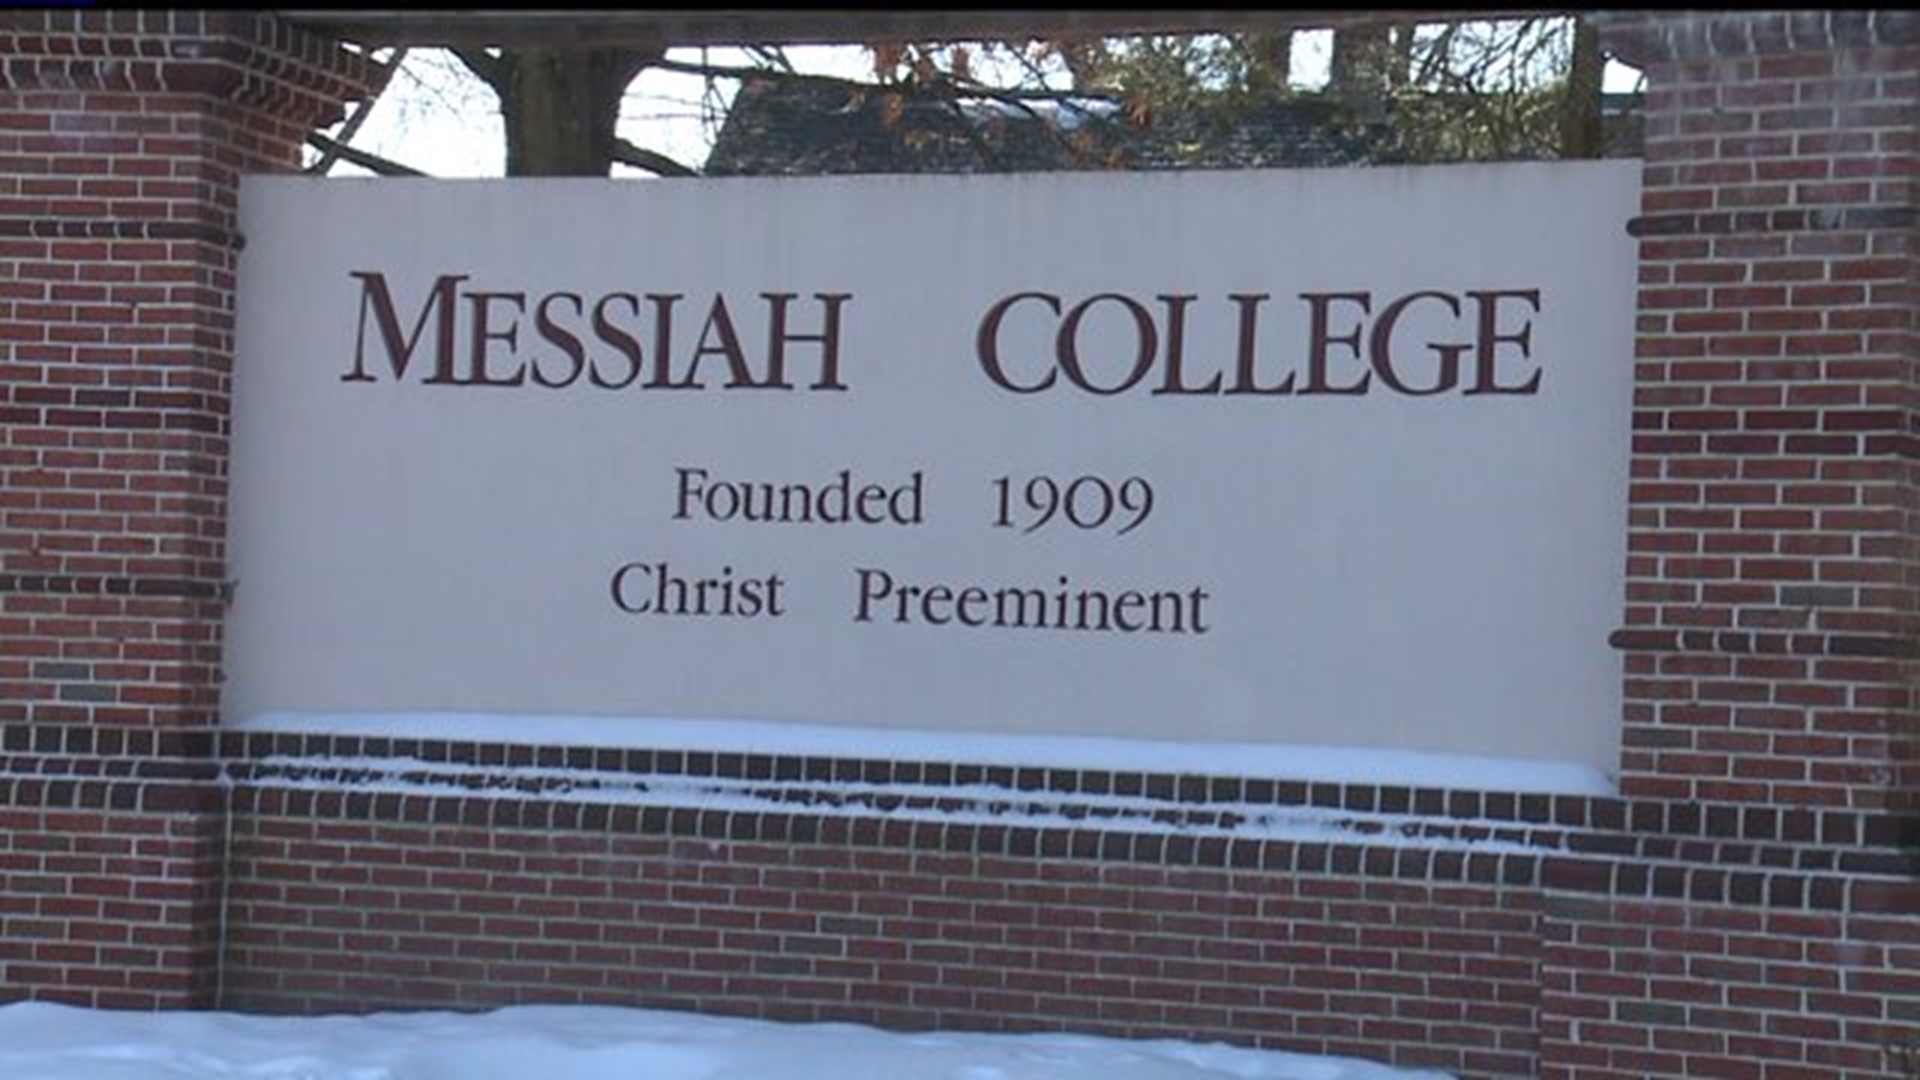 Propane shortage at Messiah College means shorter showers and less food options